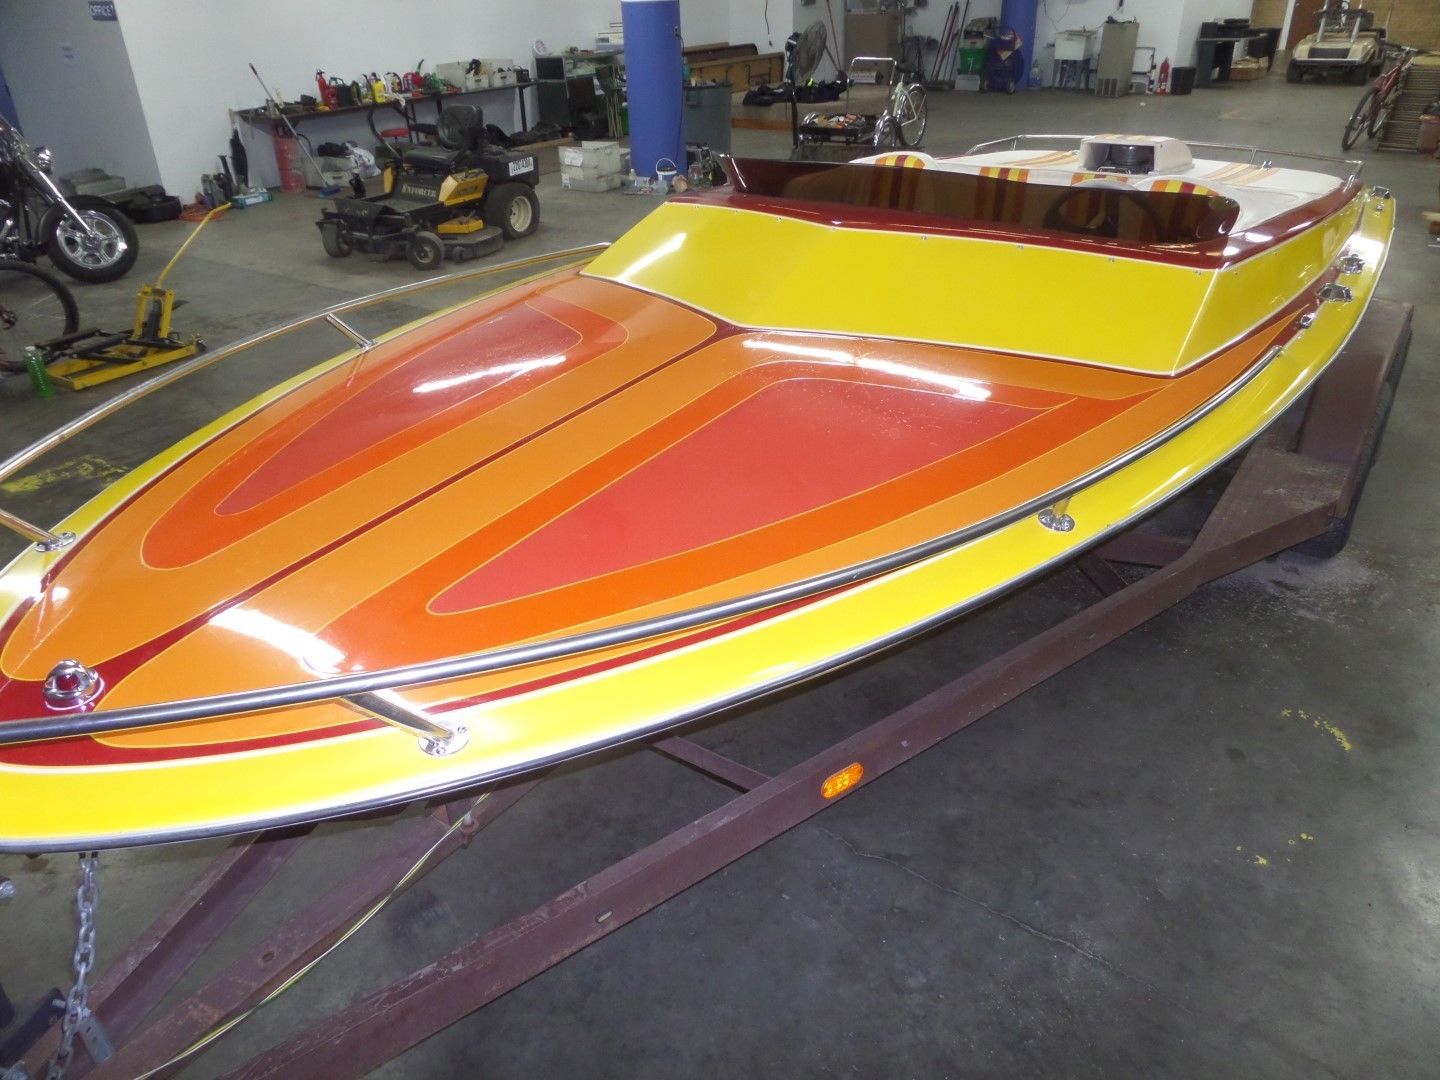 Nordiac 454 Jet Boat 1980 for sale for $5,800.